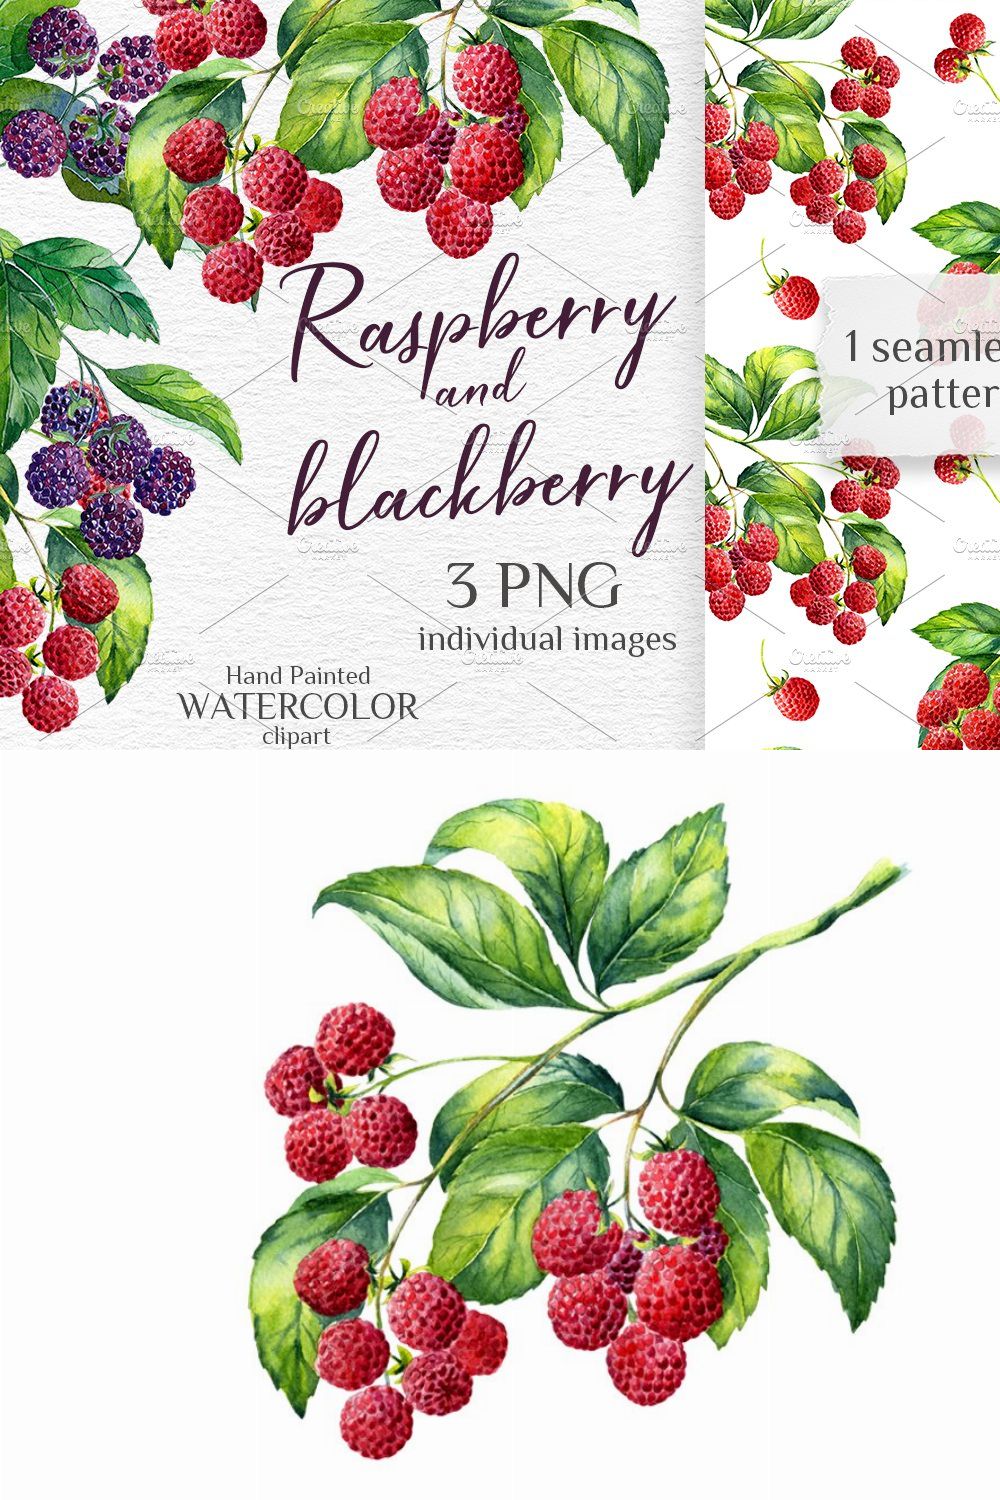 Watercolor raspberry and blackberry pinterest preview image.